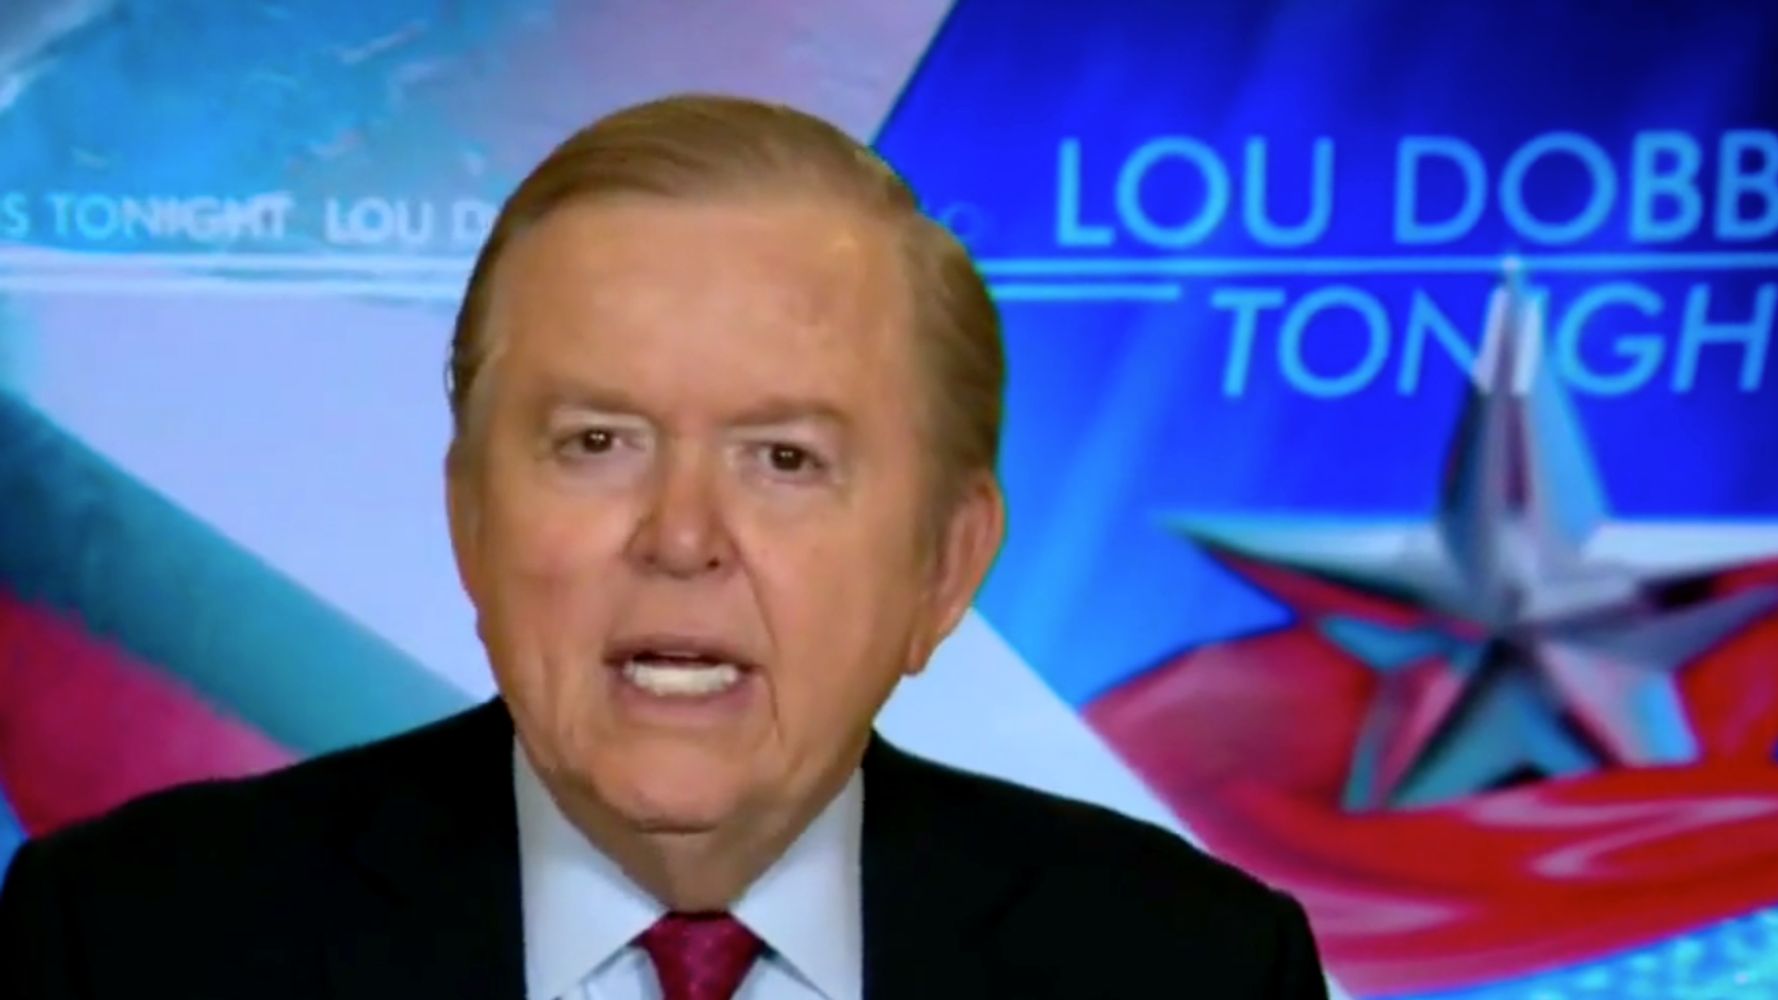 Lou Dobbs Rages At William Barr, Suggests He Might Be ‘Compromised’ Or ‘Ill’